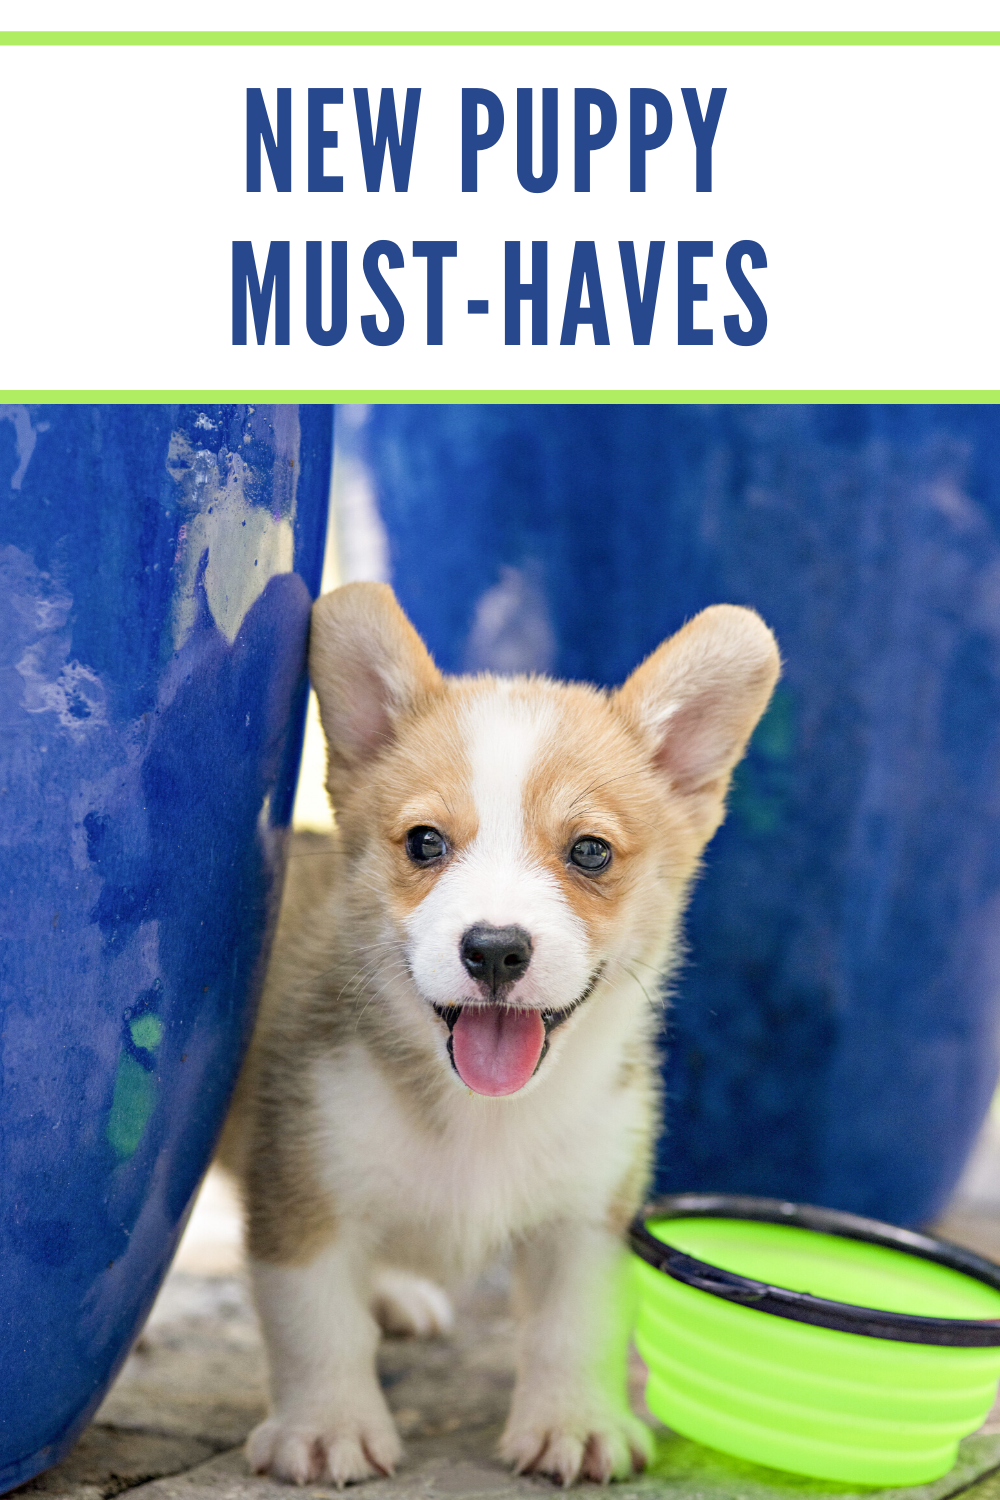 New Puppy Must-Haves - hello emily erin